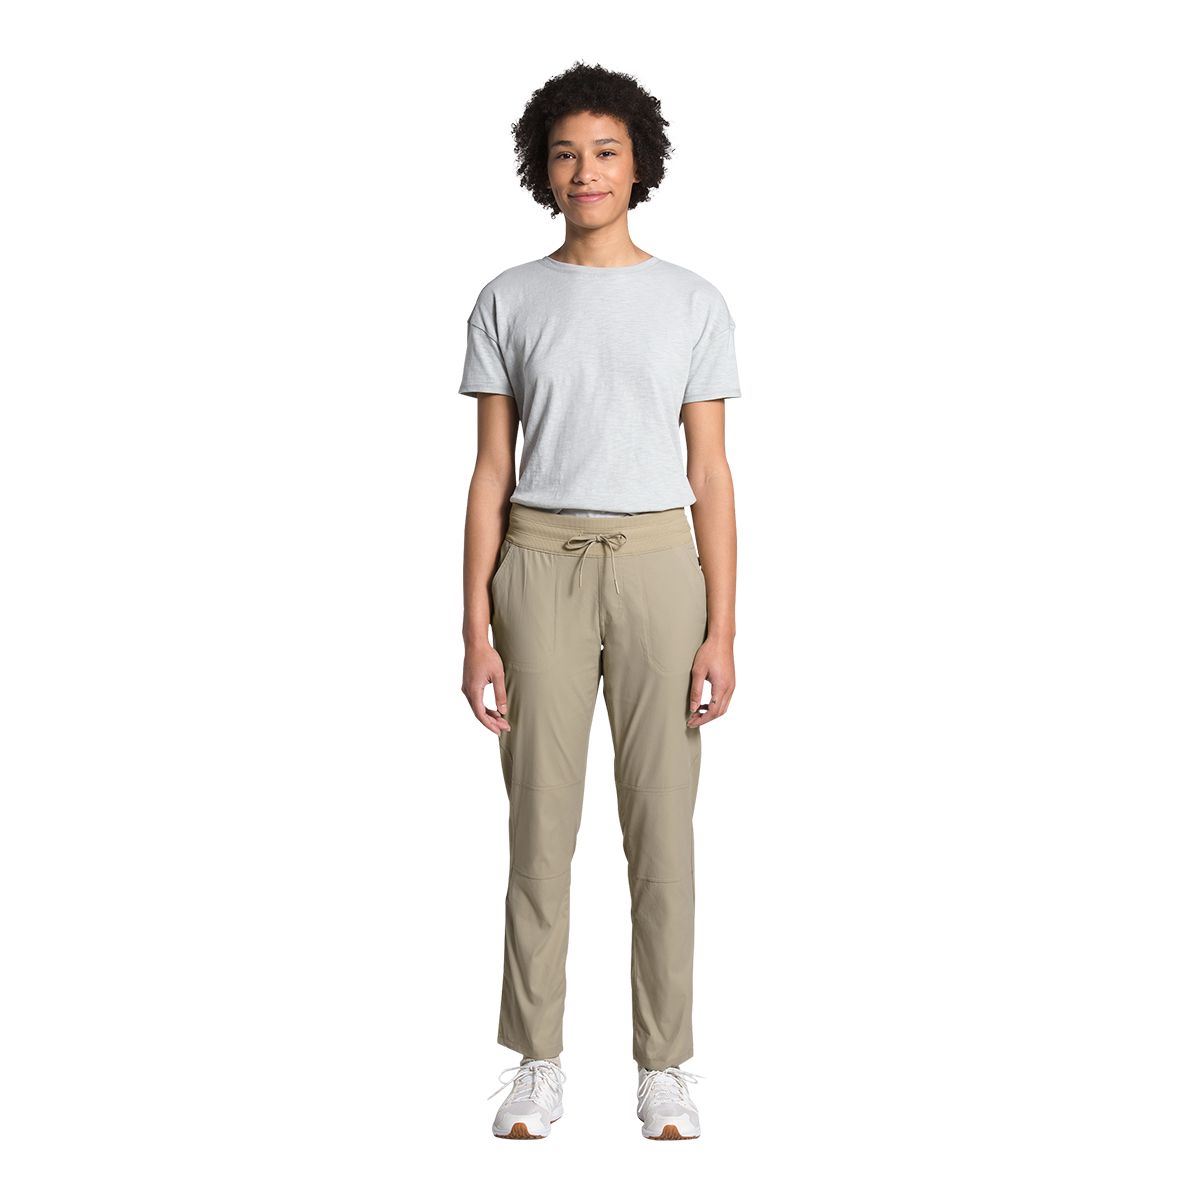 Women's Laterra Utility High Rise Pant, The North Face